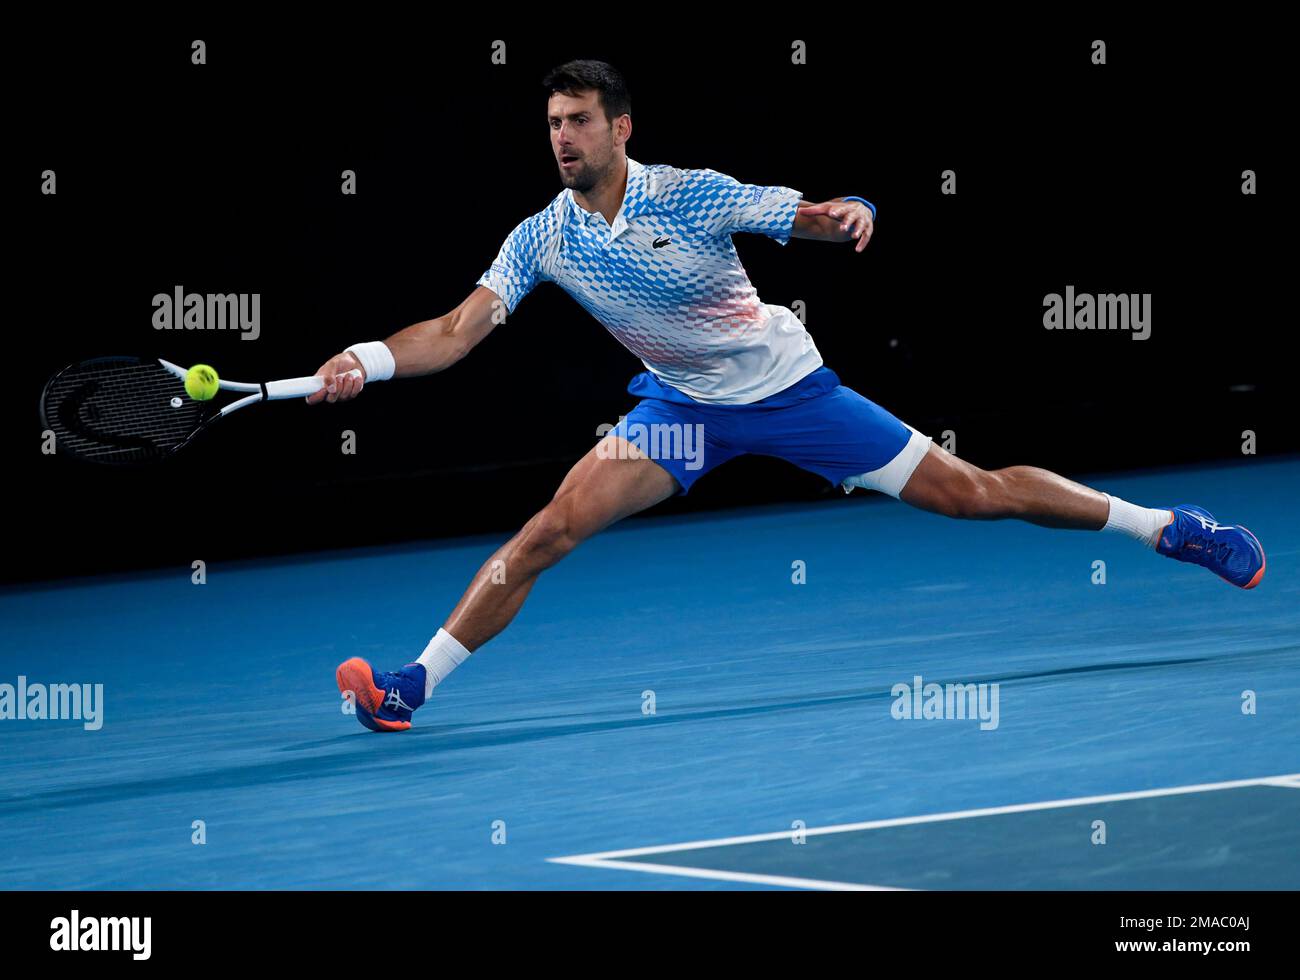 (230119) -- MELBOURNE, Jan. 19, 2023 (Xinhua) -- Novak Djokovic of Serbia competes during the men's singles second round match against Enzo Couacaud of France at Australian Open tennis tournament in Melbourne, Australia, on Jan. 19, 2023. (Xjavascript:;inhua/Guo Lei) Stock Photo